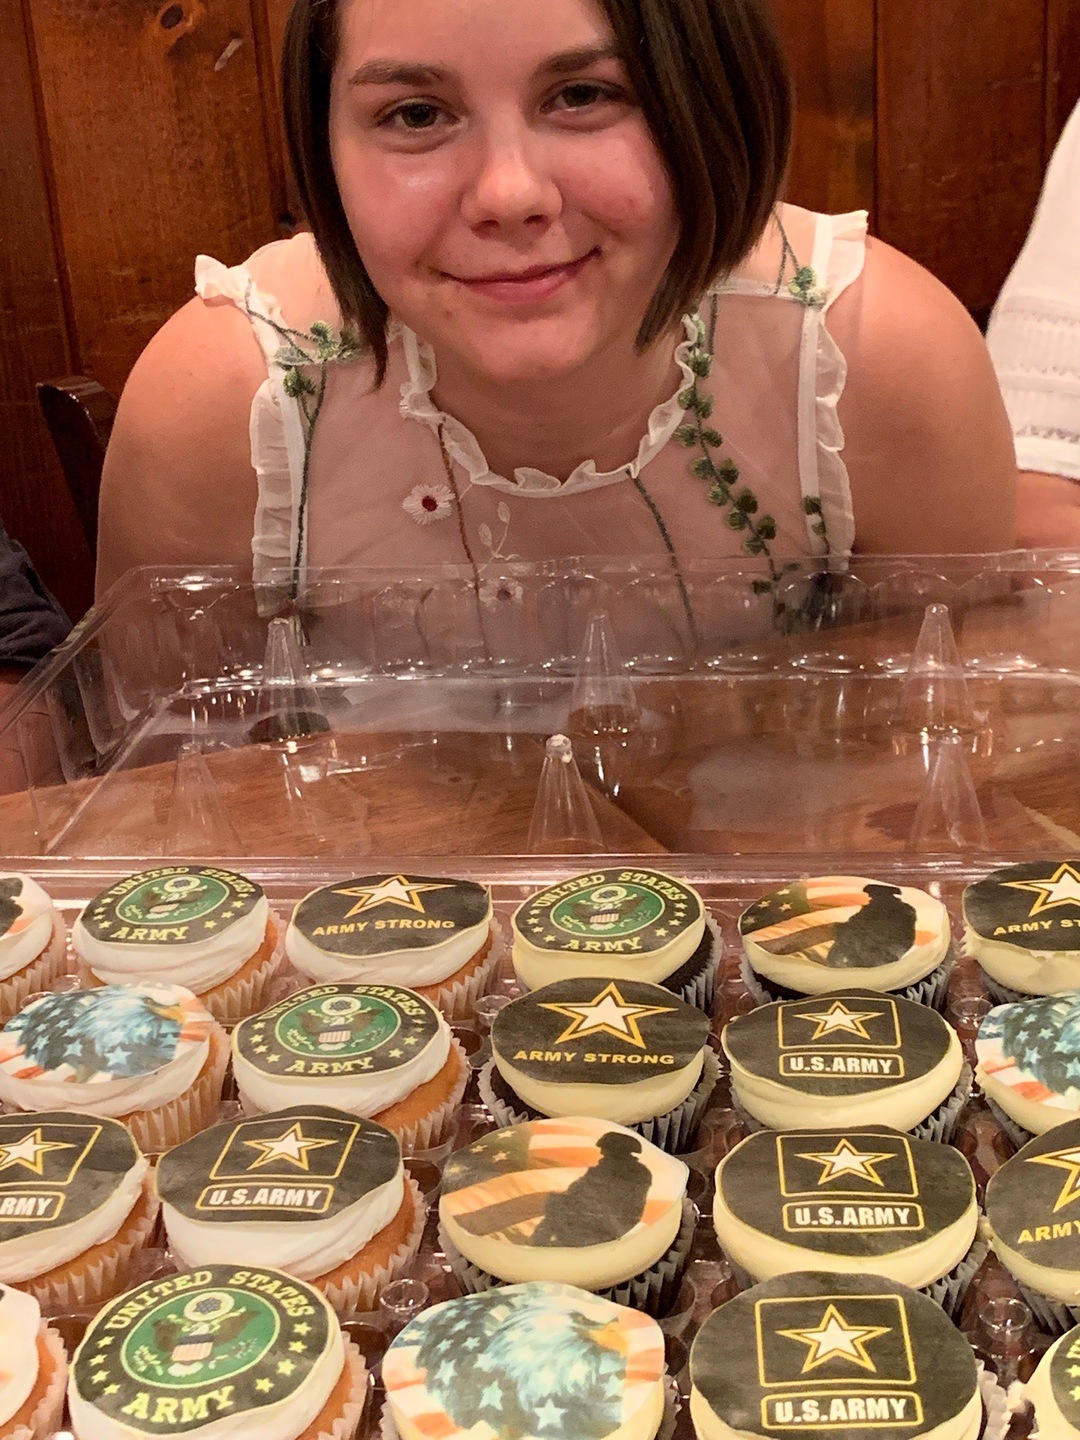 US Army cupcakes and young woman